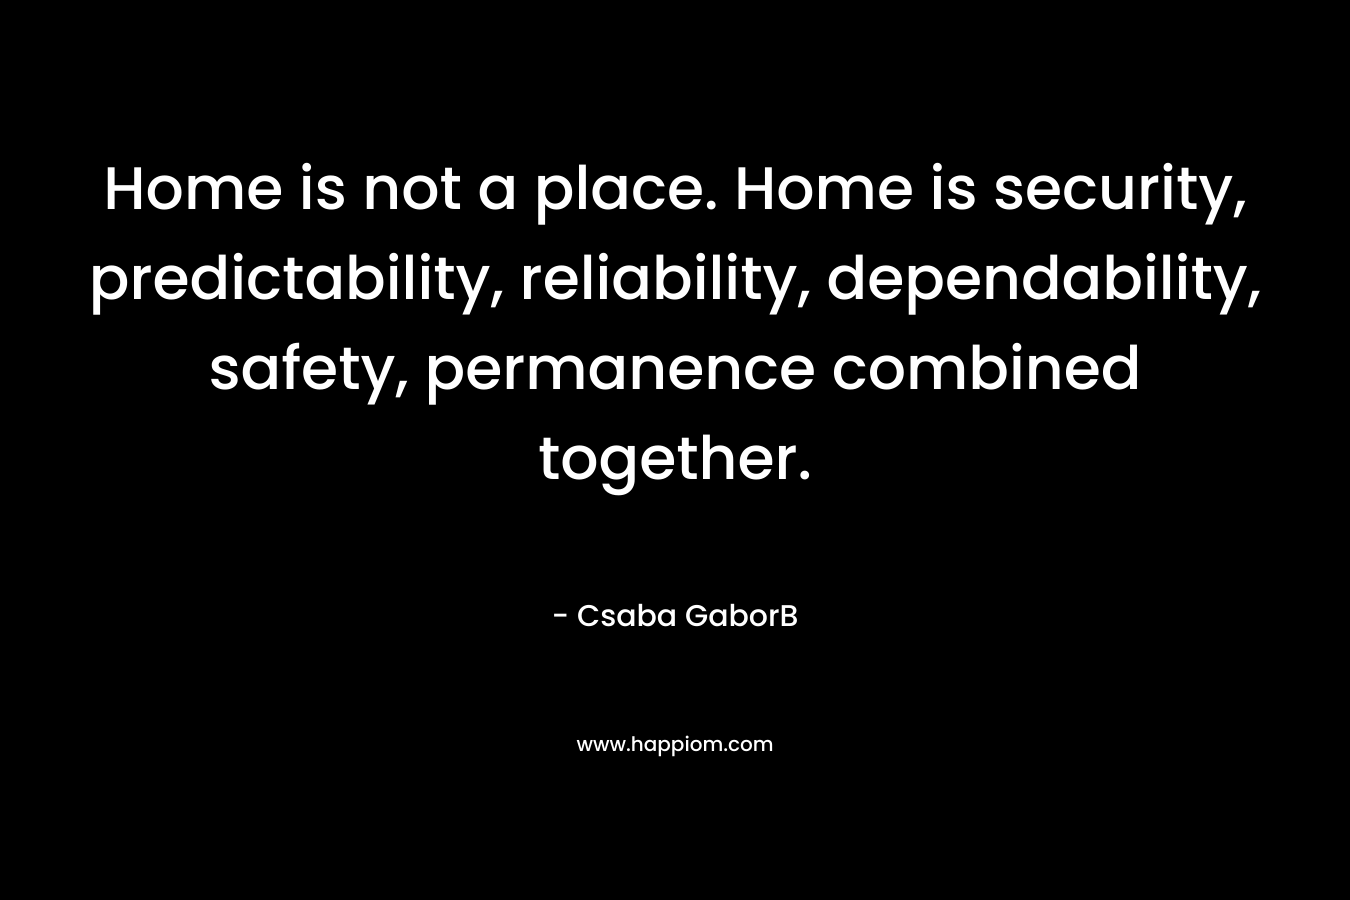  Home is not a place. Home is security, predictability, reliability, dependability, safety, permanence combined together. 